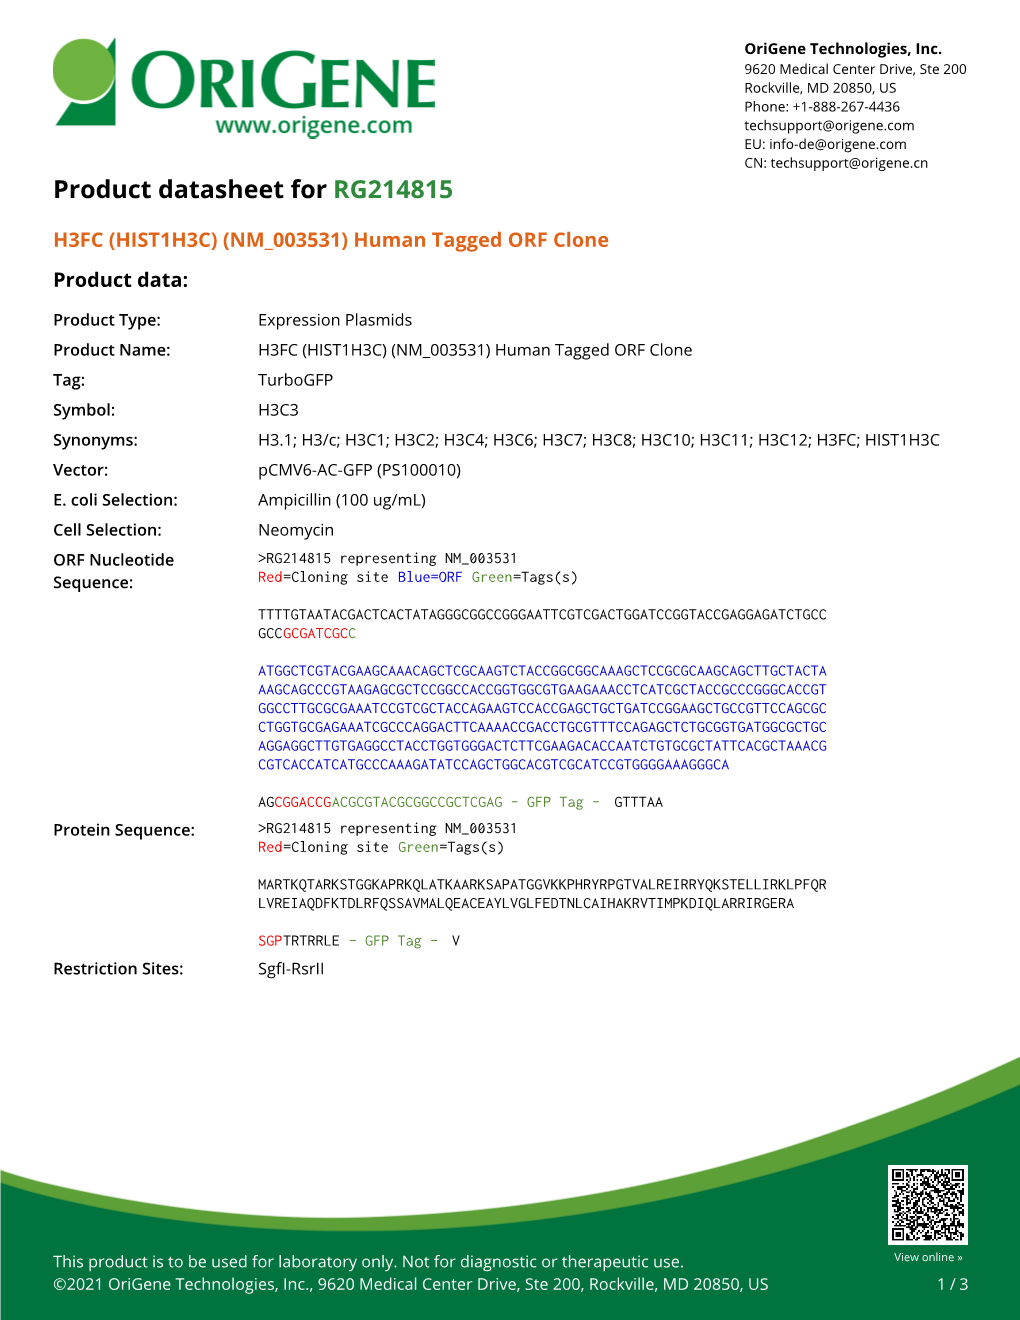 H3FC (HIST1H3C) (NM 003531) Human Tagged ORF Clone Product Data